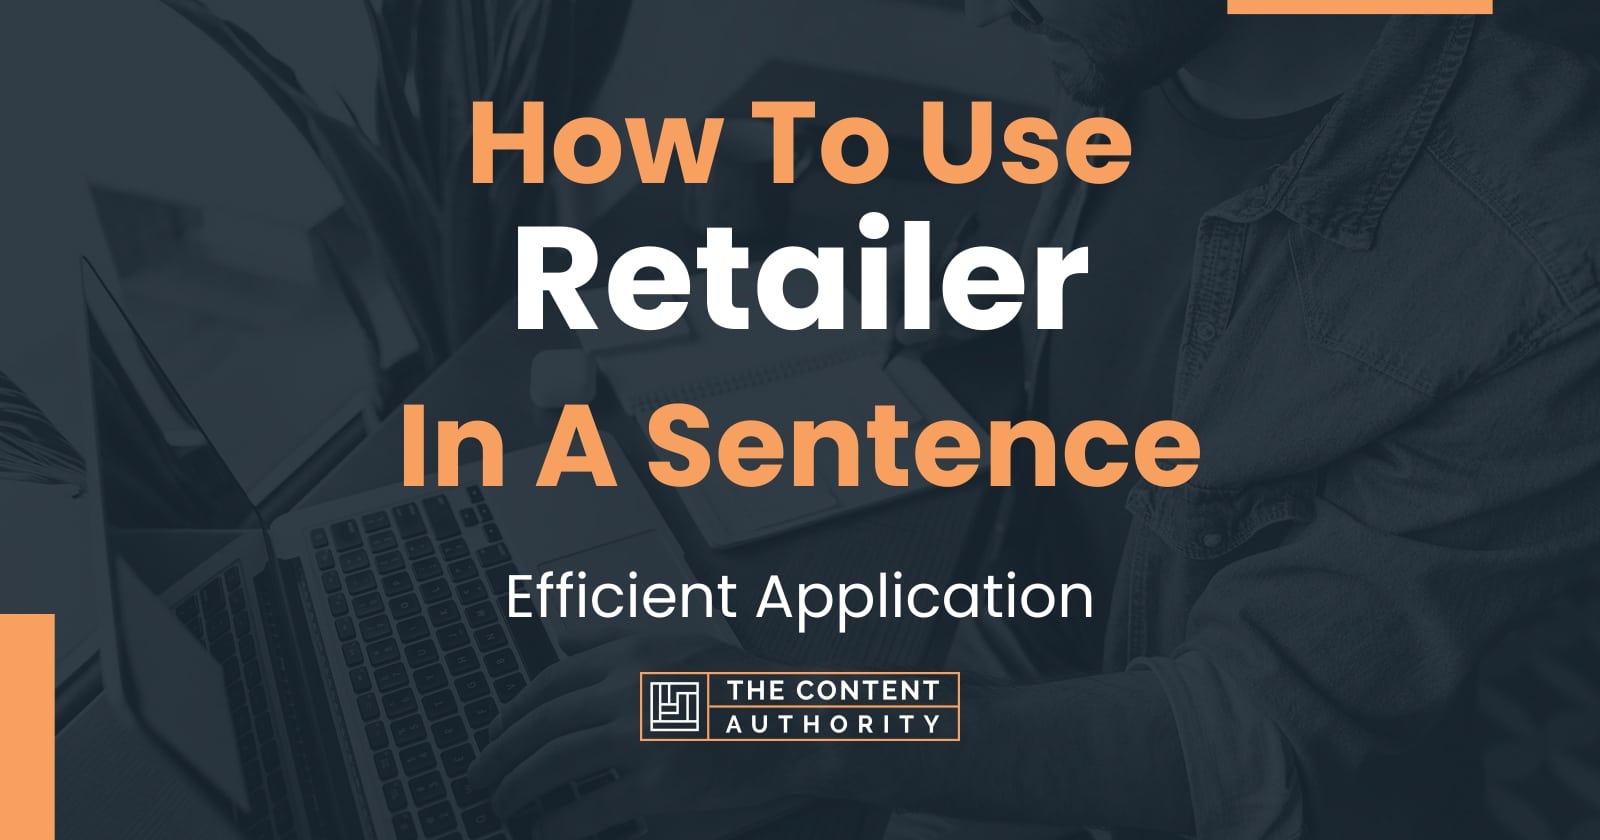 How To Use Retailer In A Sentence 